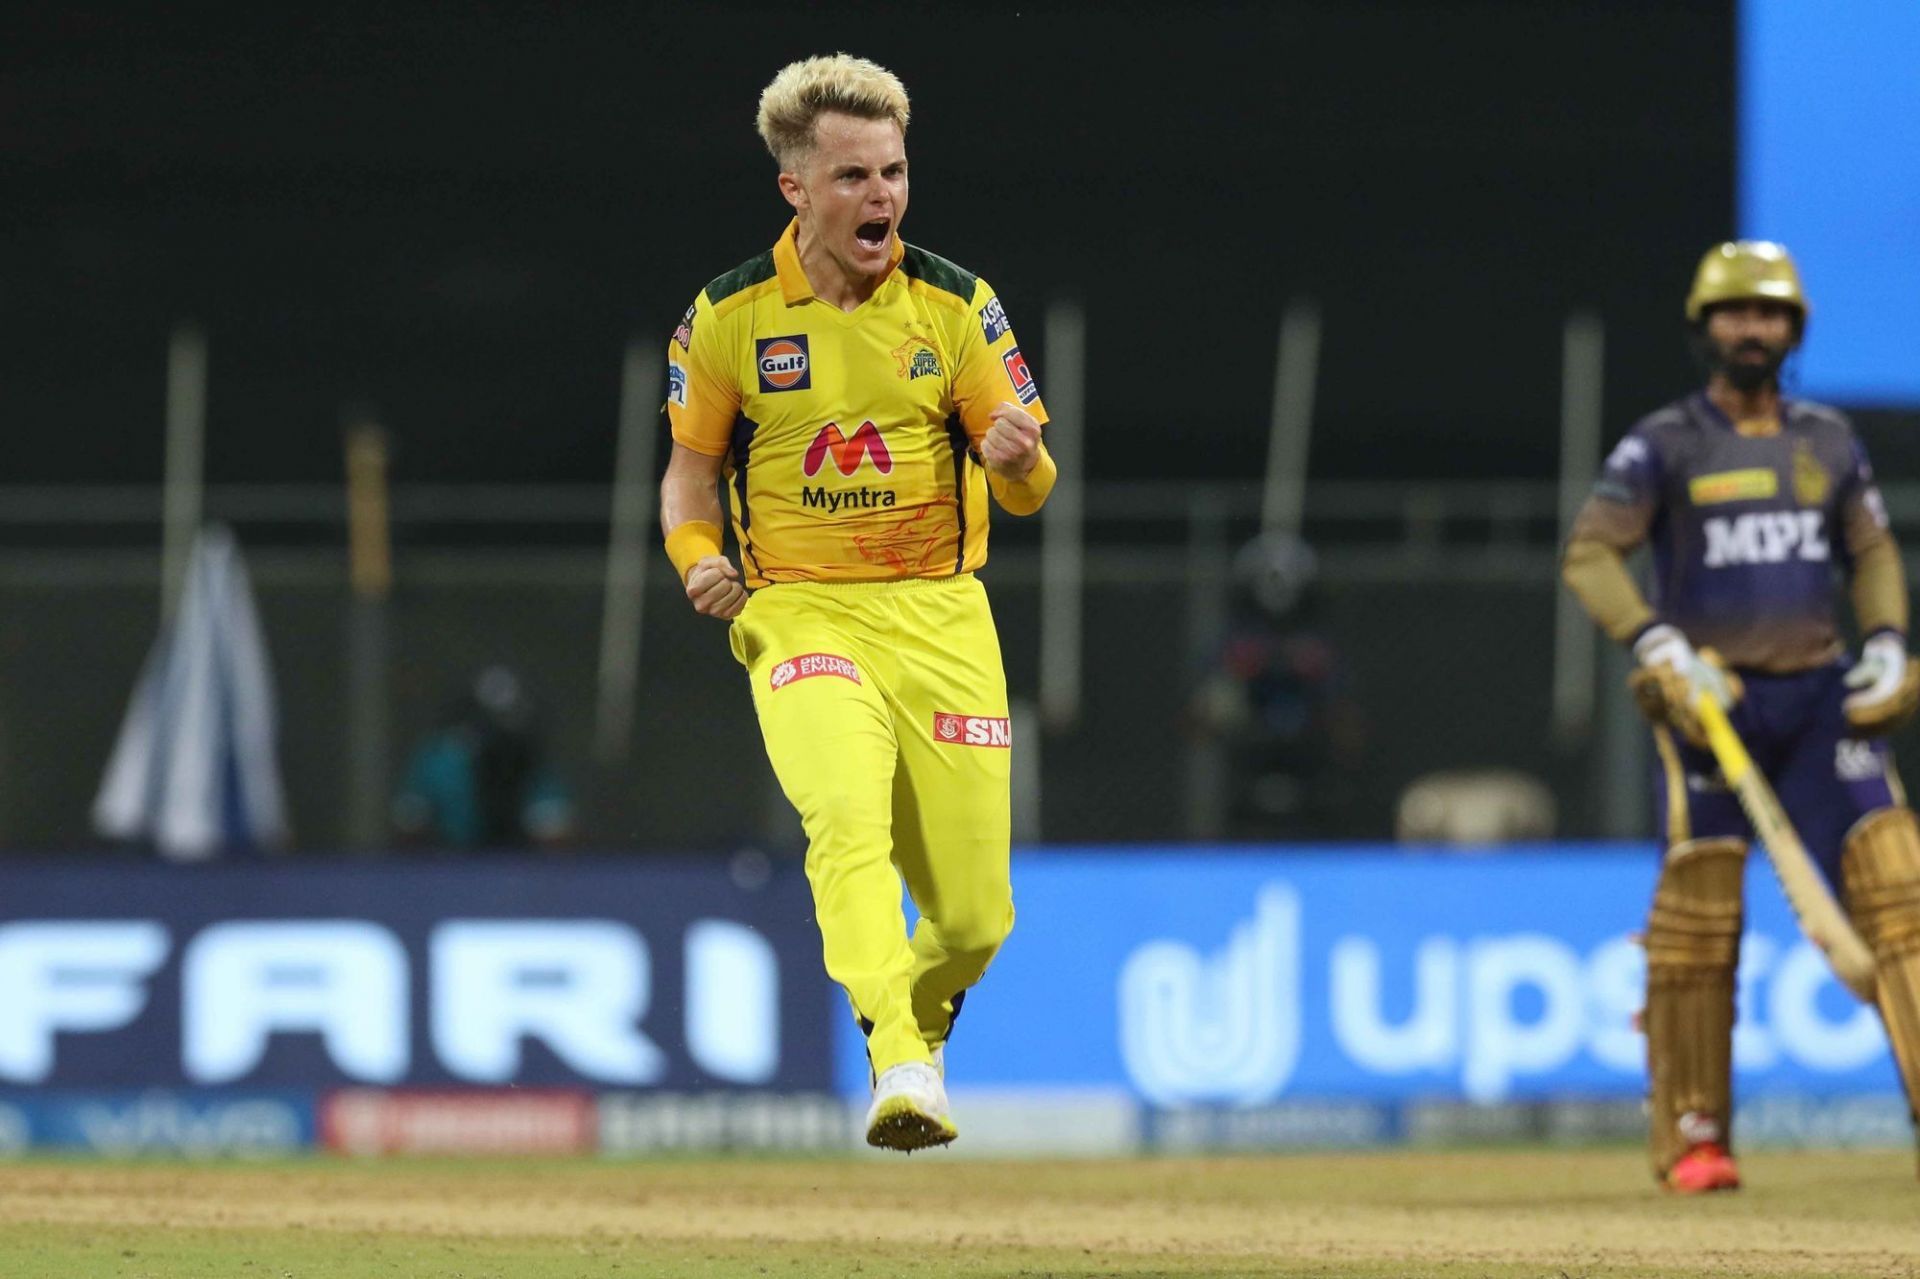 Sam Curran could be a wise retention for the future. (Image Courtesy: IPLT20.com)